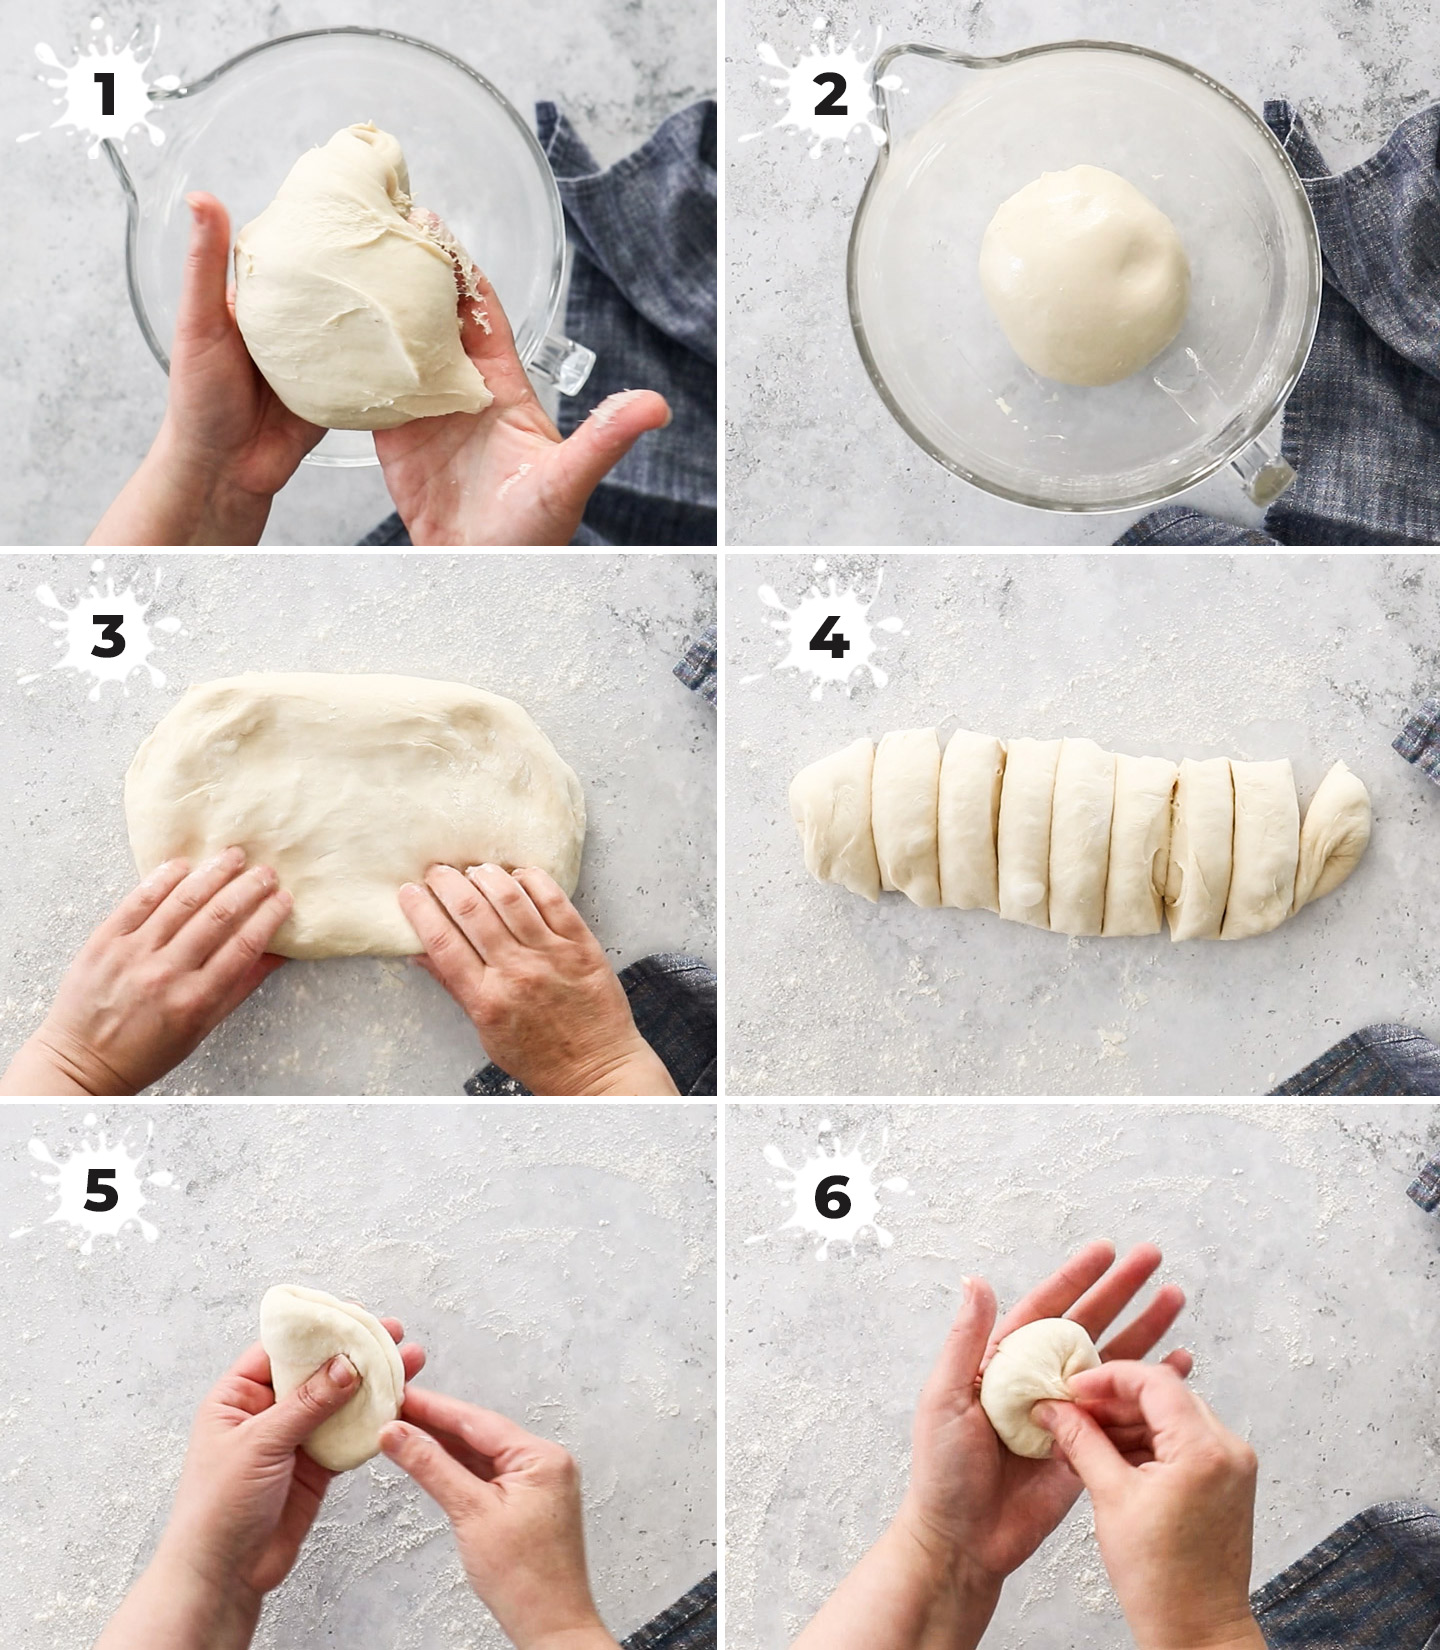 A collage showing how to make the bazlama dough.